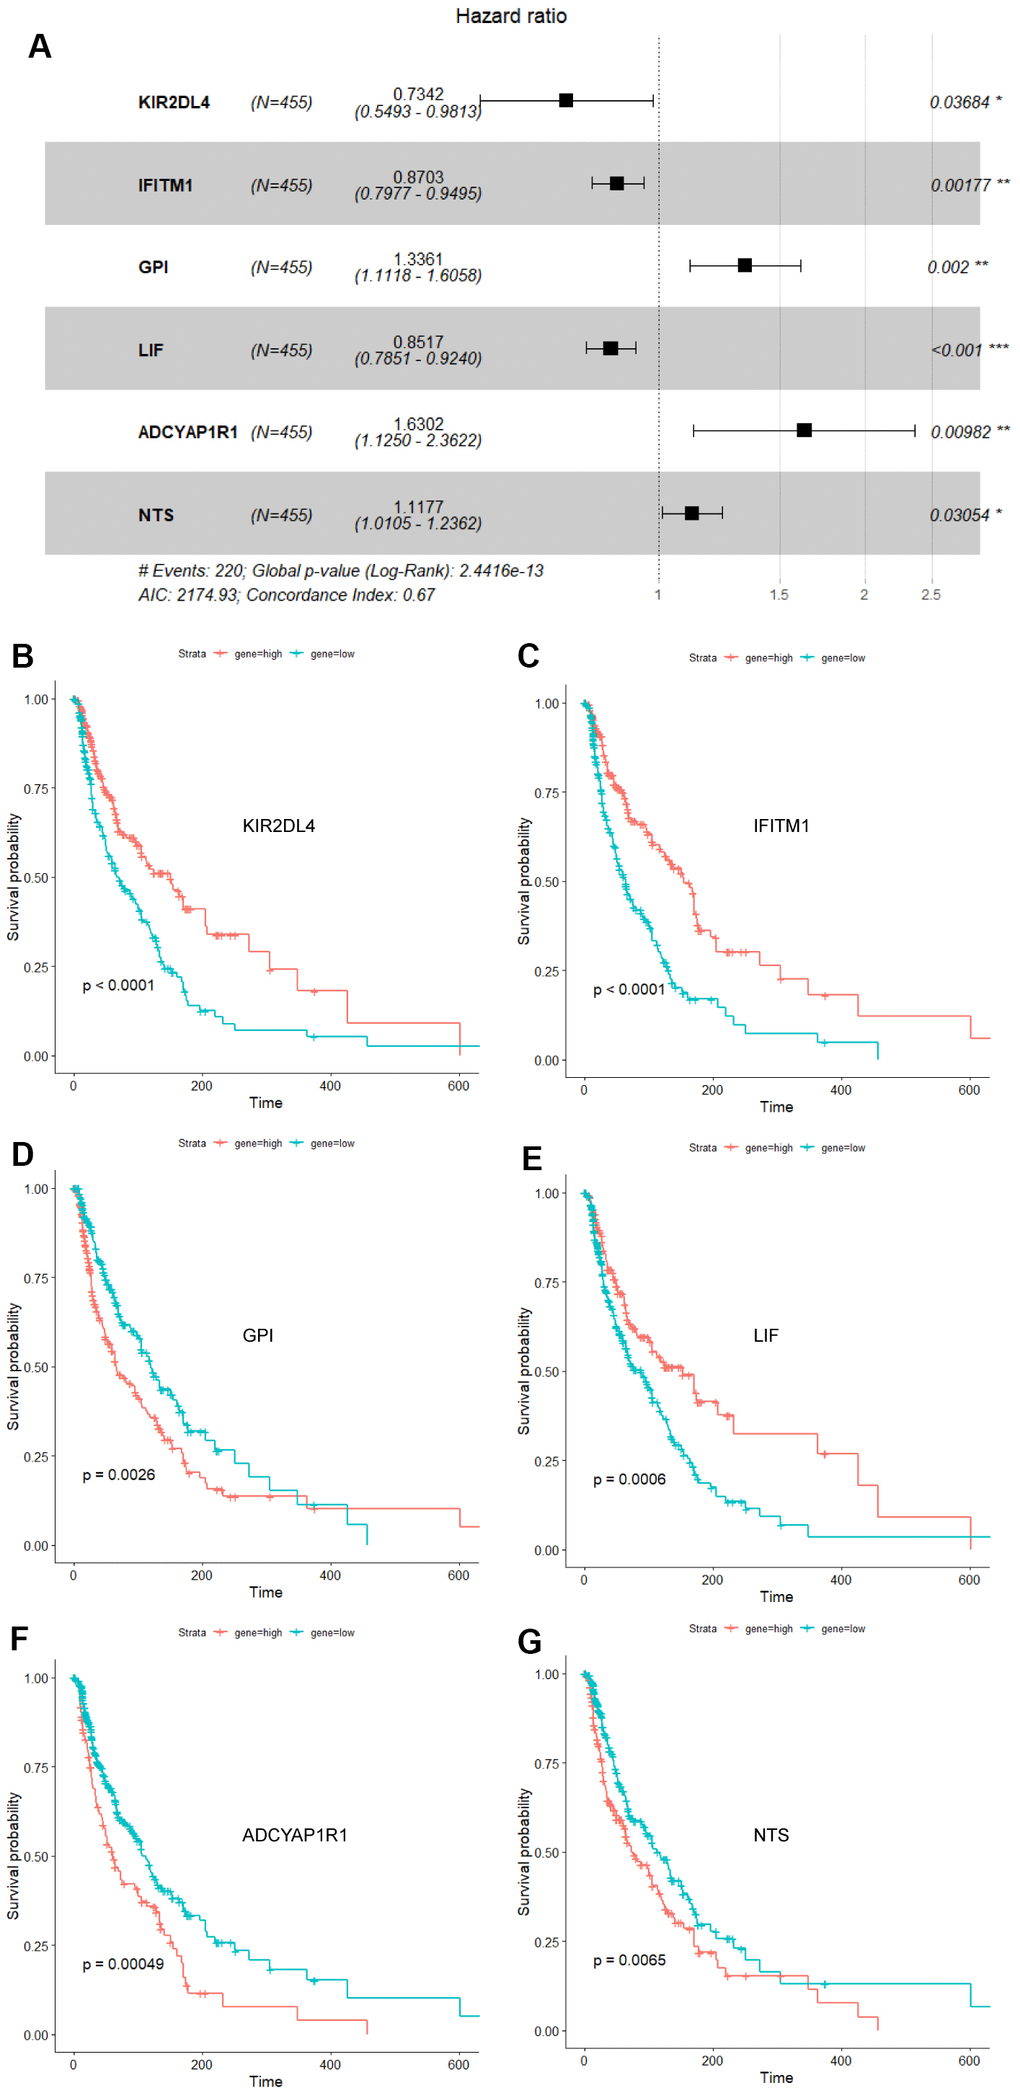 Forest plot and survival analysis of biomarkers. (A) The Cox proportional hazards model based on ADCYAP1R1, GPI, IFITM1, KIR2DL4, LIF and NTS. (B) Survival analysis of KIR2DL4 in melanoma (PC) Survival analysis of IFITM1 in melanoma (PD) Survival analysis of GPI in melanoma (P=0.0026). (E) Survival analysis of LIF in melanoma (P=0.0006). (F) Survival analysis of ADCYAP1R1 in melanoma (P=0.00049). (G) Survival analysis of NTS in melanoma (P=0.0065).